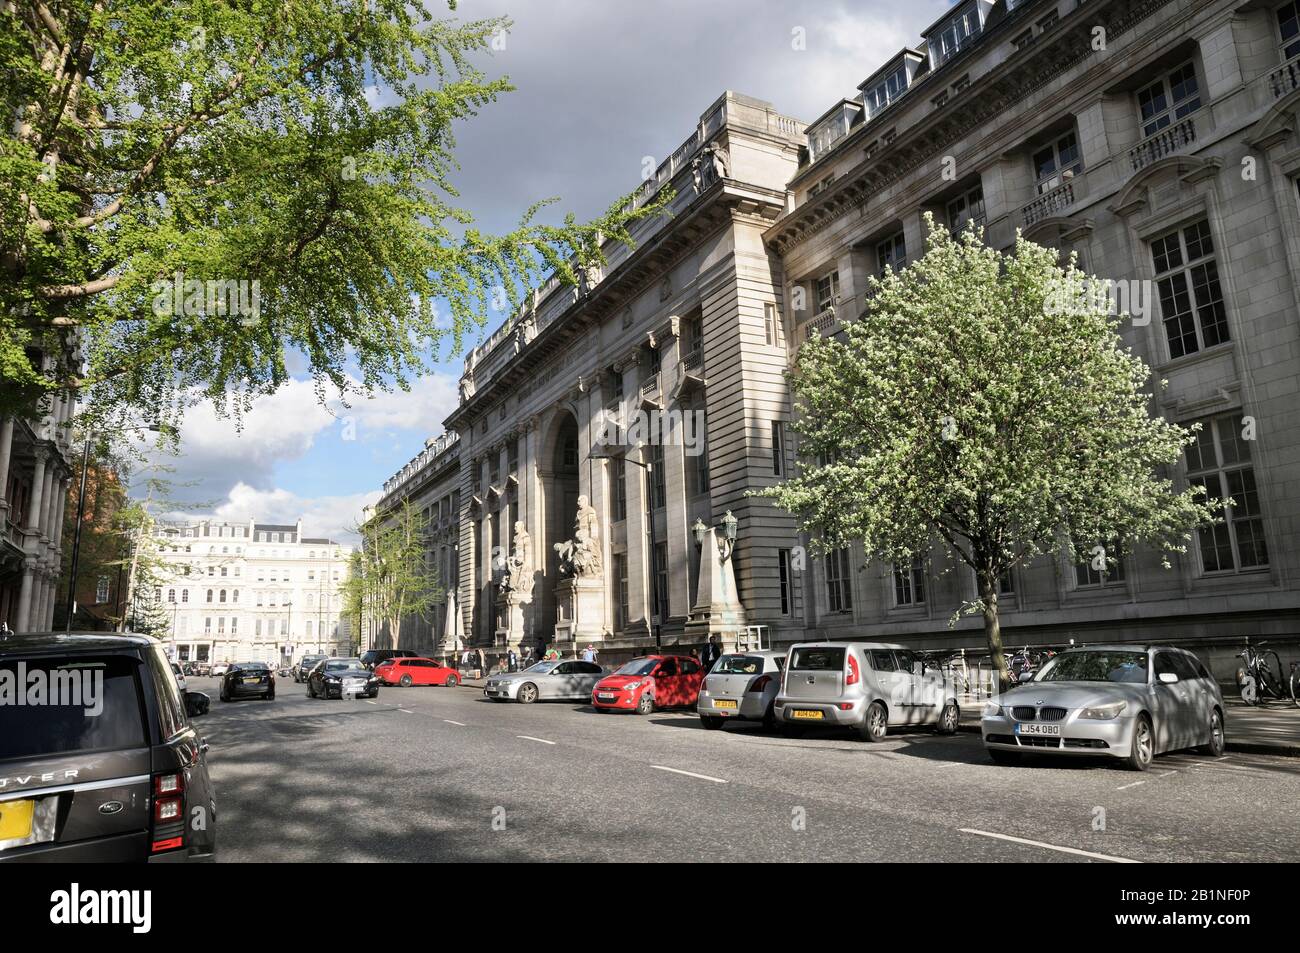 Imperial College of Science, Technology and Medicine, Royal School of Mines Building, South Kensington, Londres, Inglaterra, Reino Unido Foto de stock